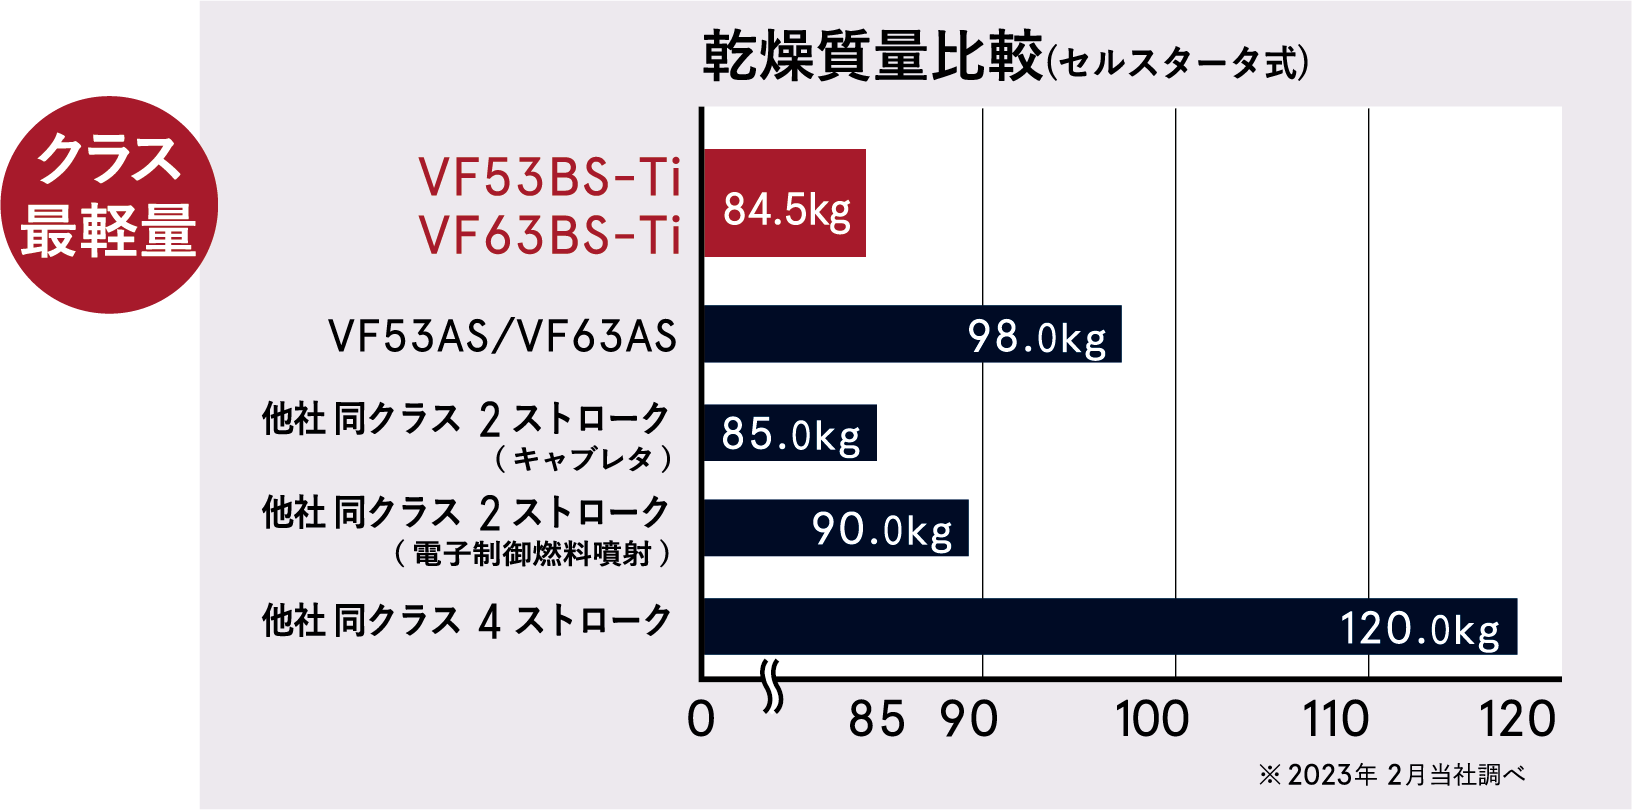 VF53 63BS-Ti-最軽量グラフ.png